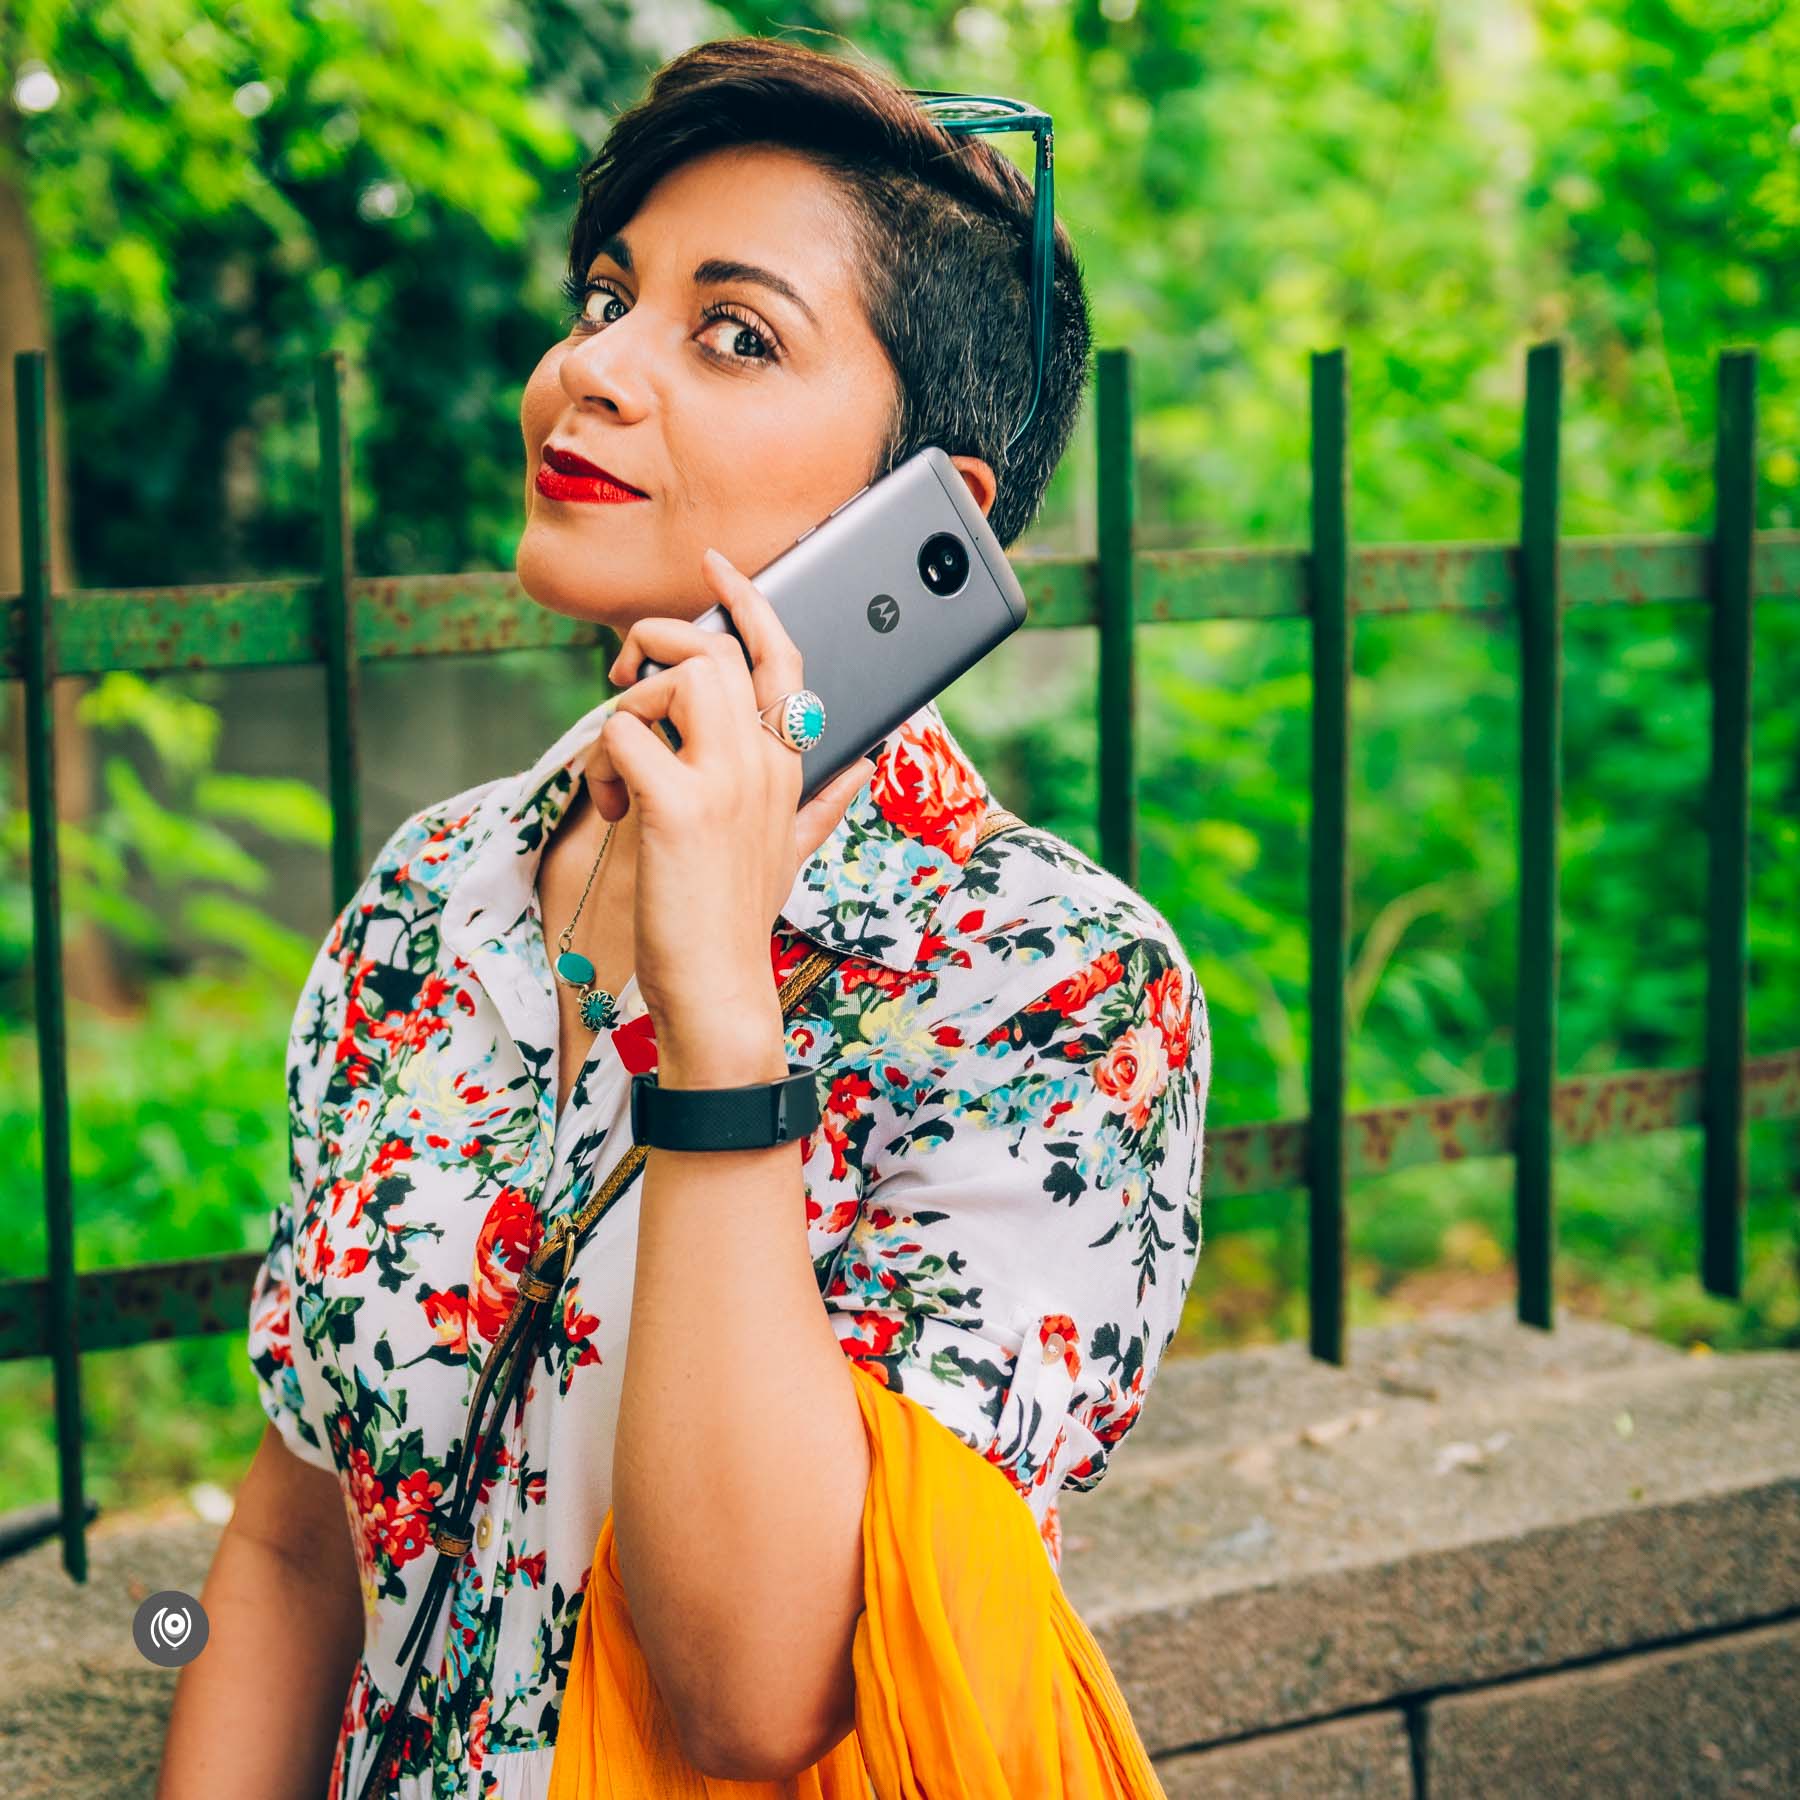 Naina.co, Naina Redhu, Motorola India, MotoE4Plus, Moto E4 Plus, Mobile Device, EyesForTechnology, Technology, Smartphone, 500 mAH Battery, Long lasting battery, Mobile Phone, Lifestyle, Luxury, Photographer, Blogger, Content Strategist, Content Queen, Video Production, Video Produced, Video